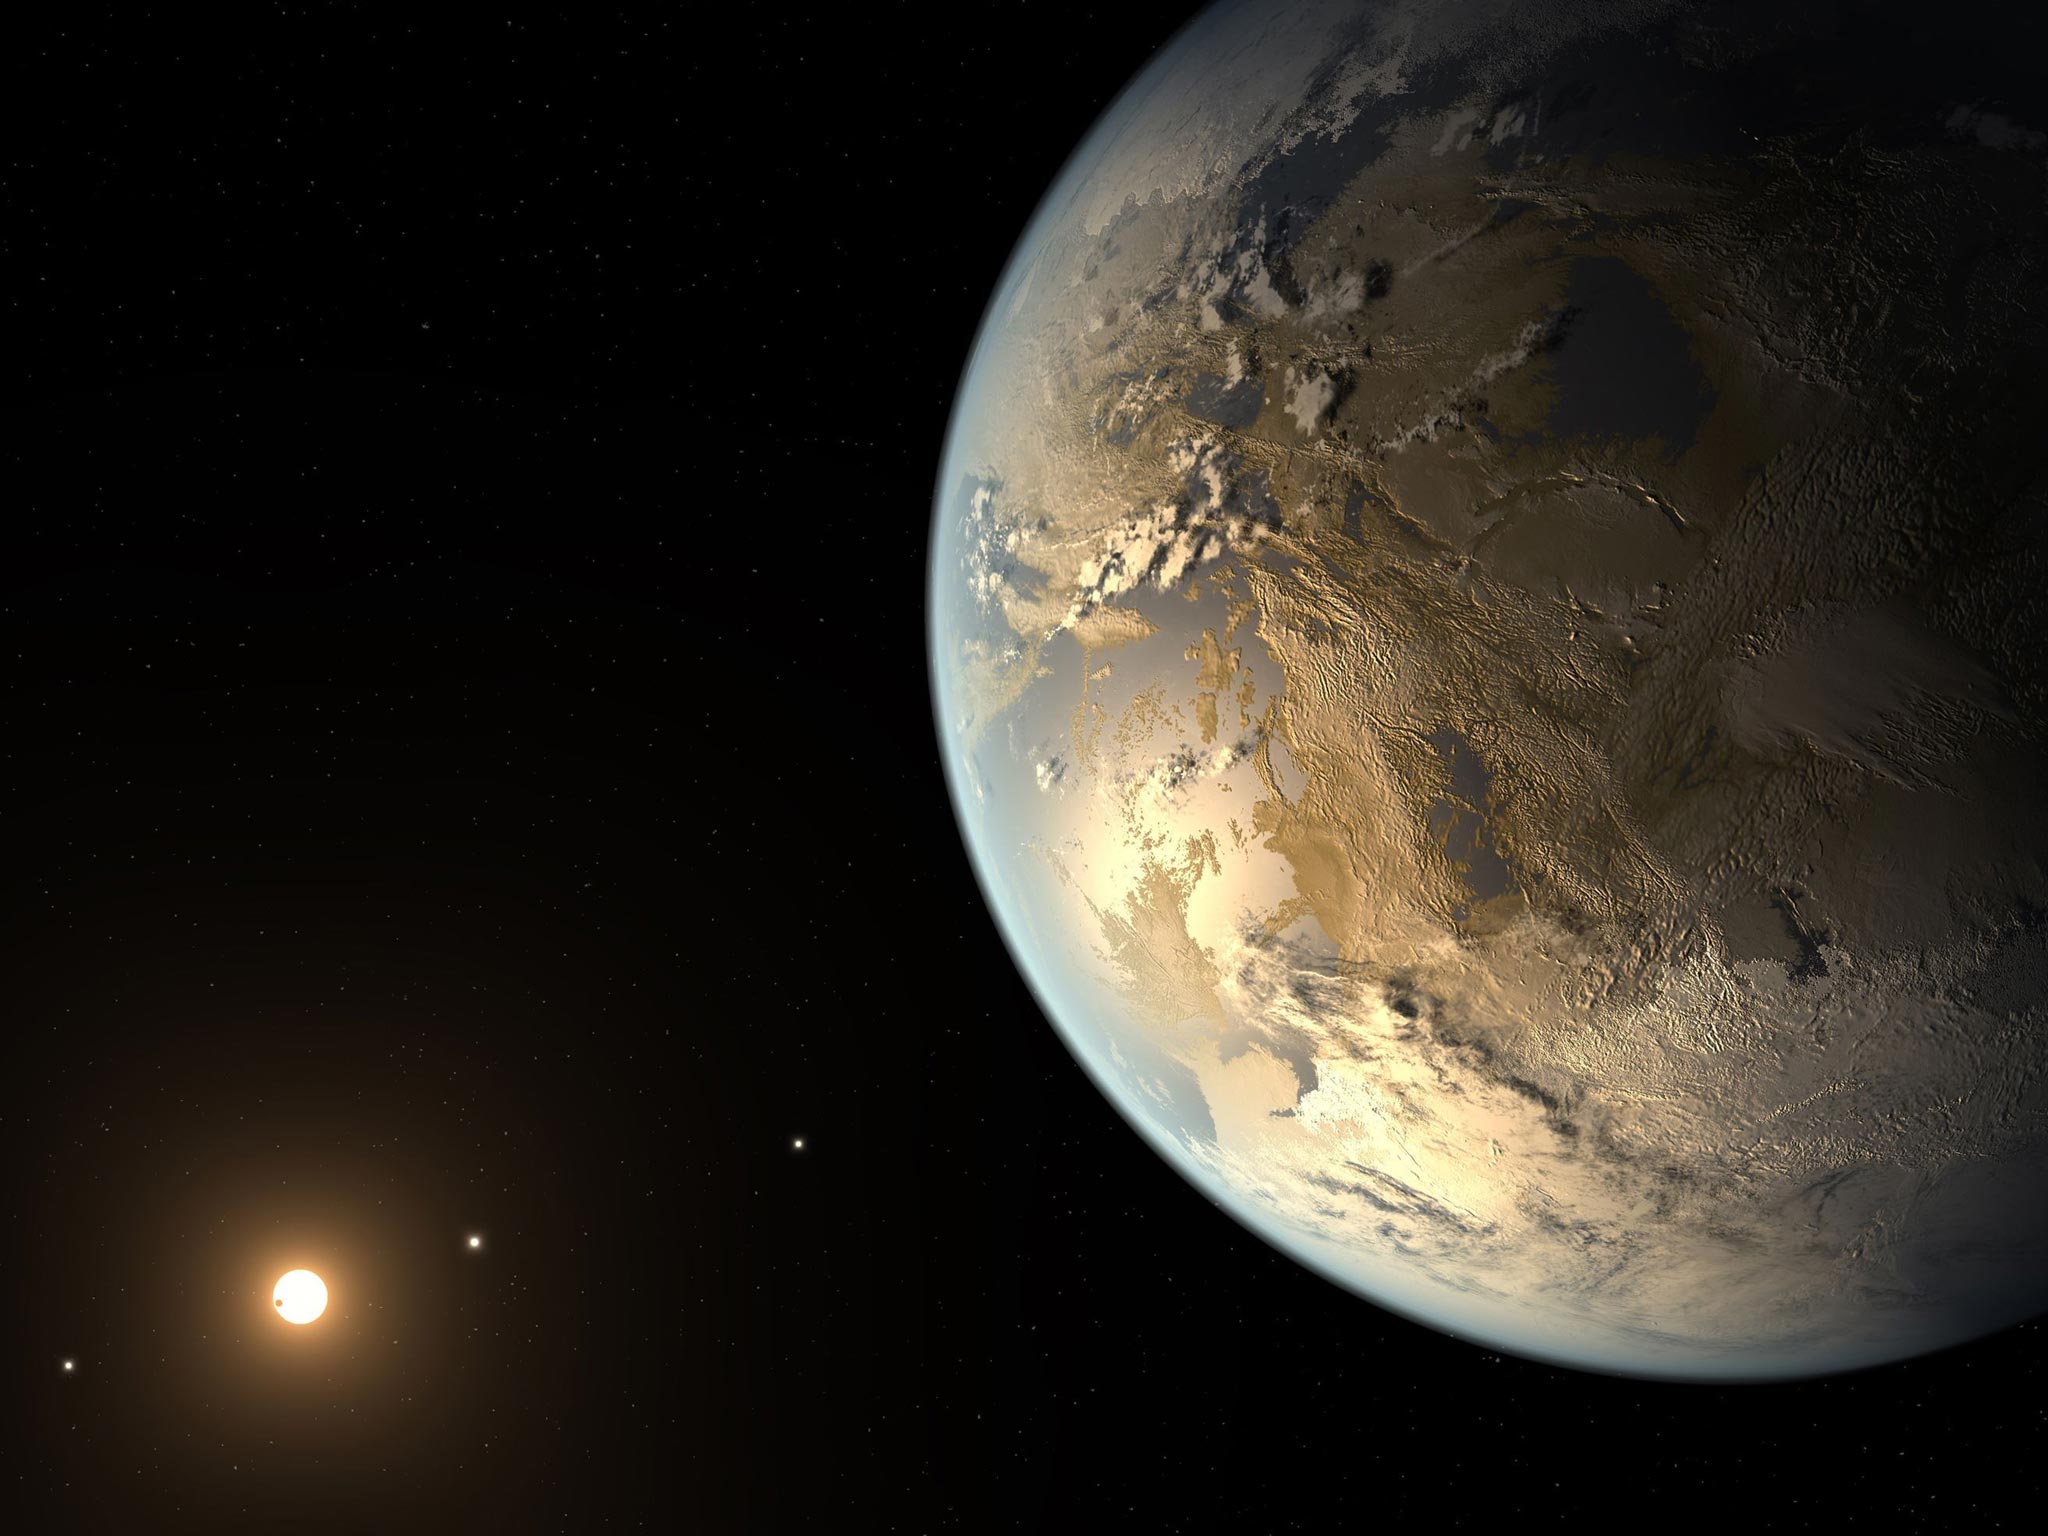 An artist's impression of Kepler-186f which may have conditions suitable to life